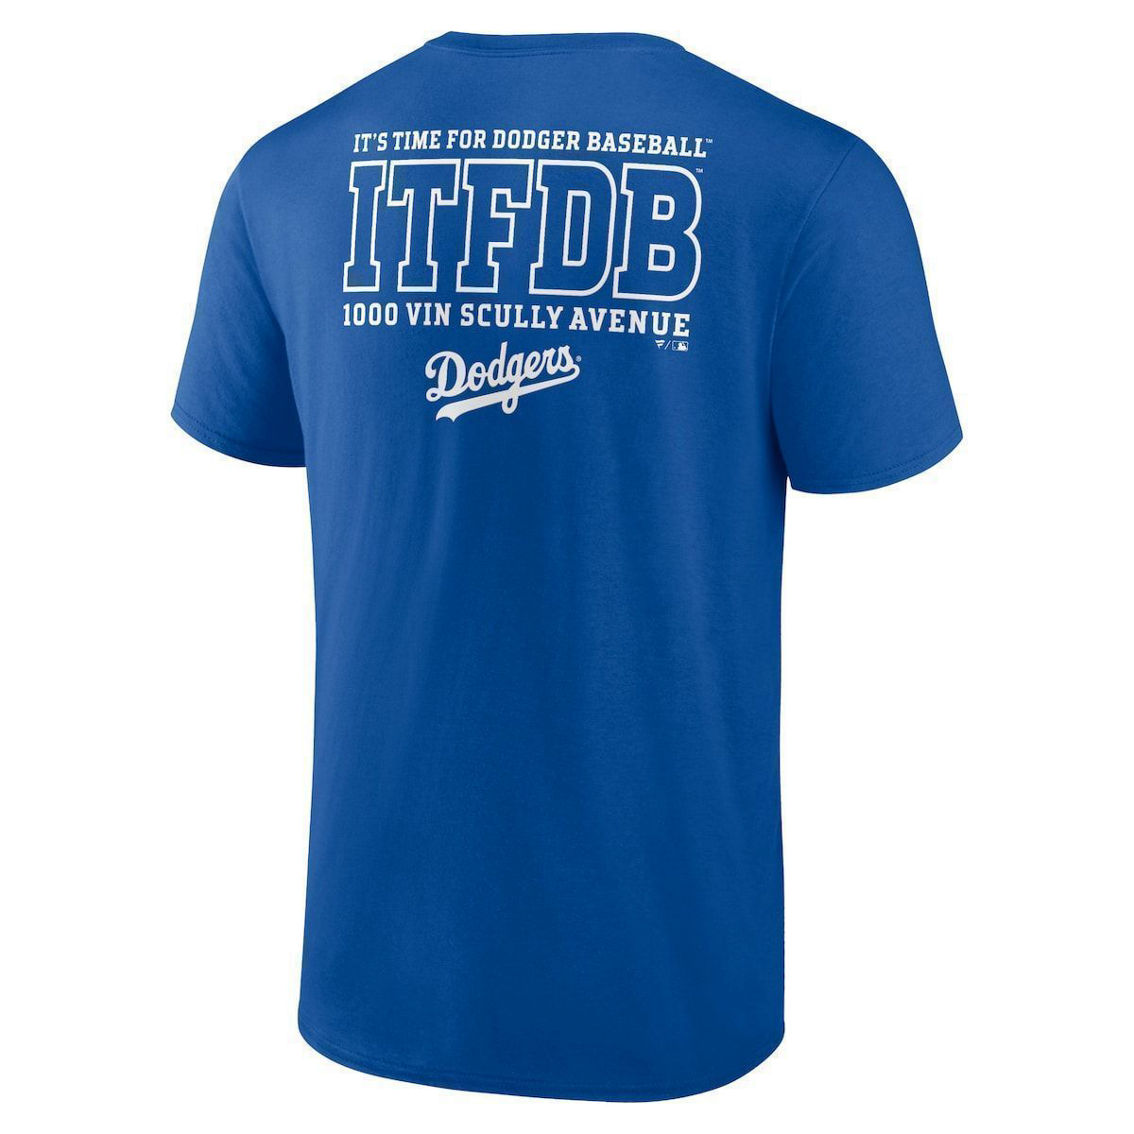 Fanatics Branded Men's Royal Los Angeles Dodgers Iconic Bring It T-Shirt - Image 4 of 4